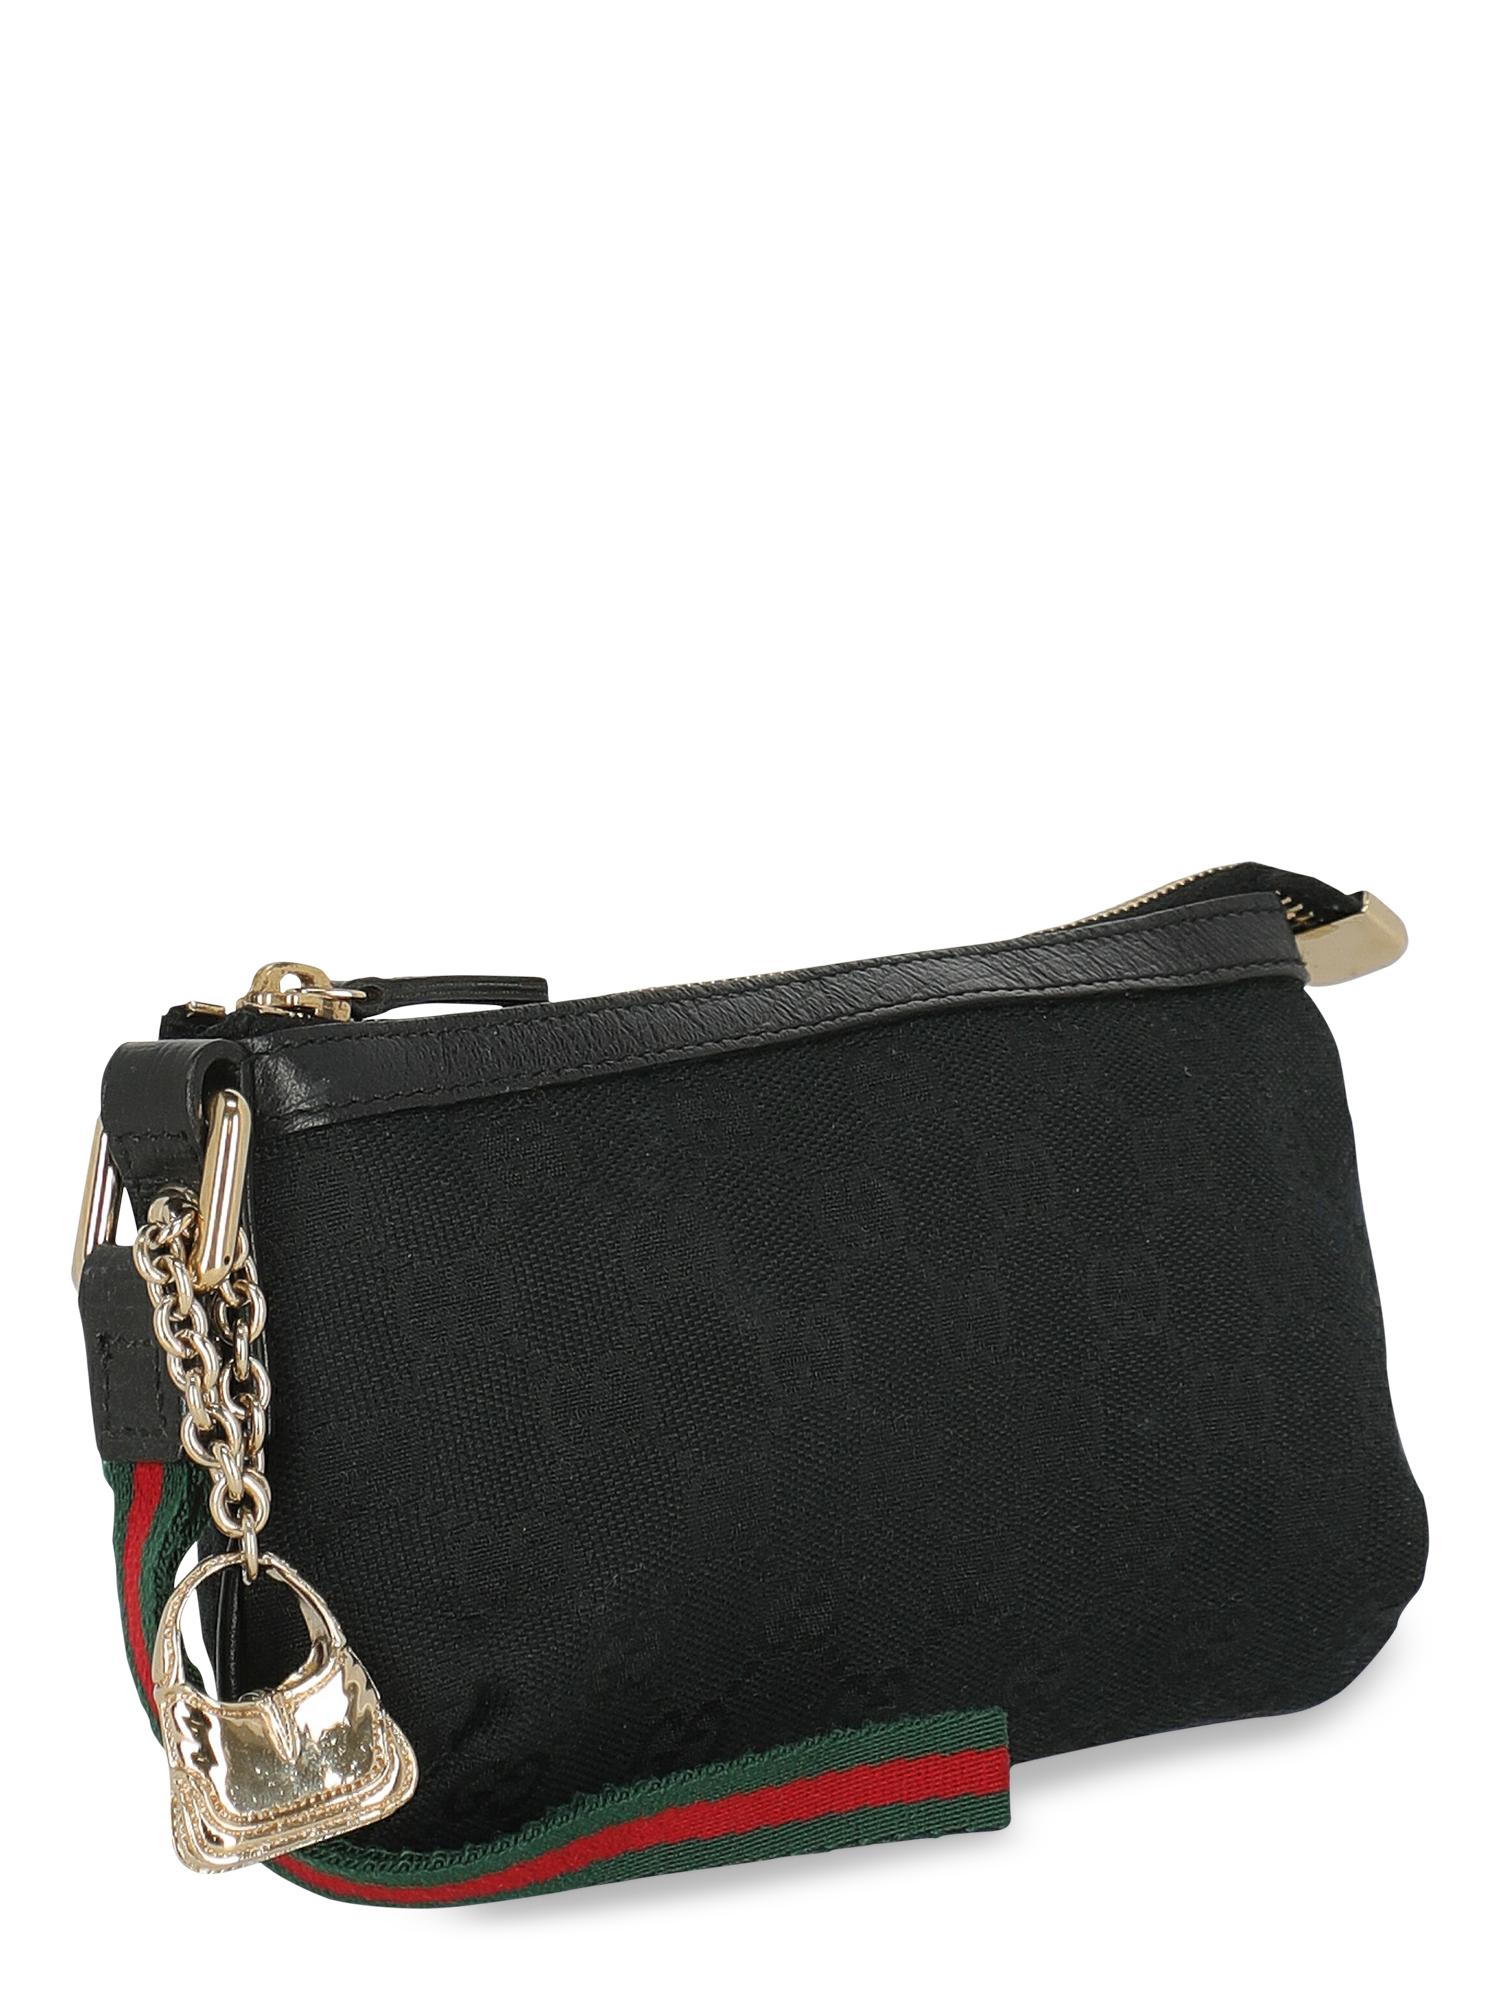 Gucci Women Handbags Black Fabric  In Good Condition For Sale In Milan, IT